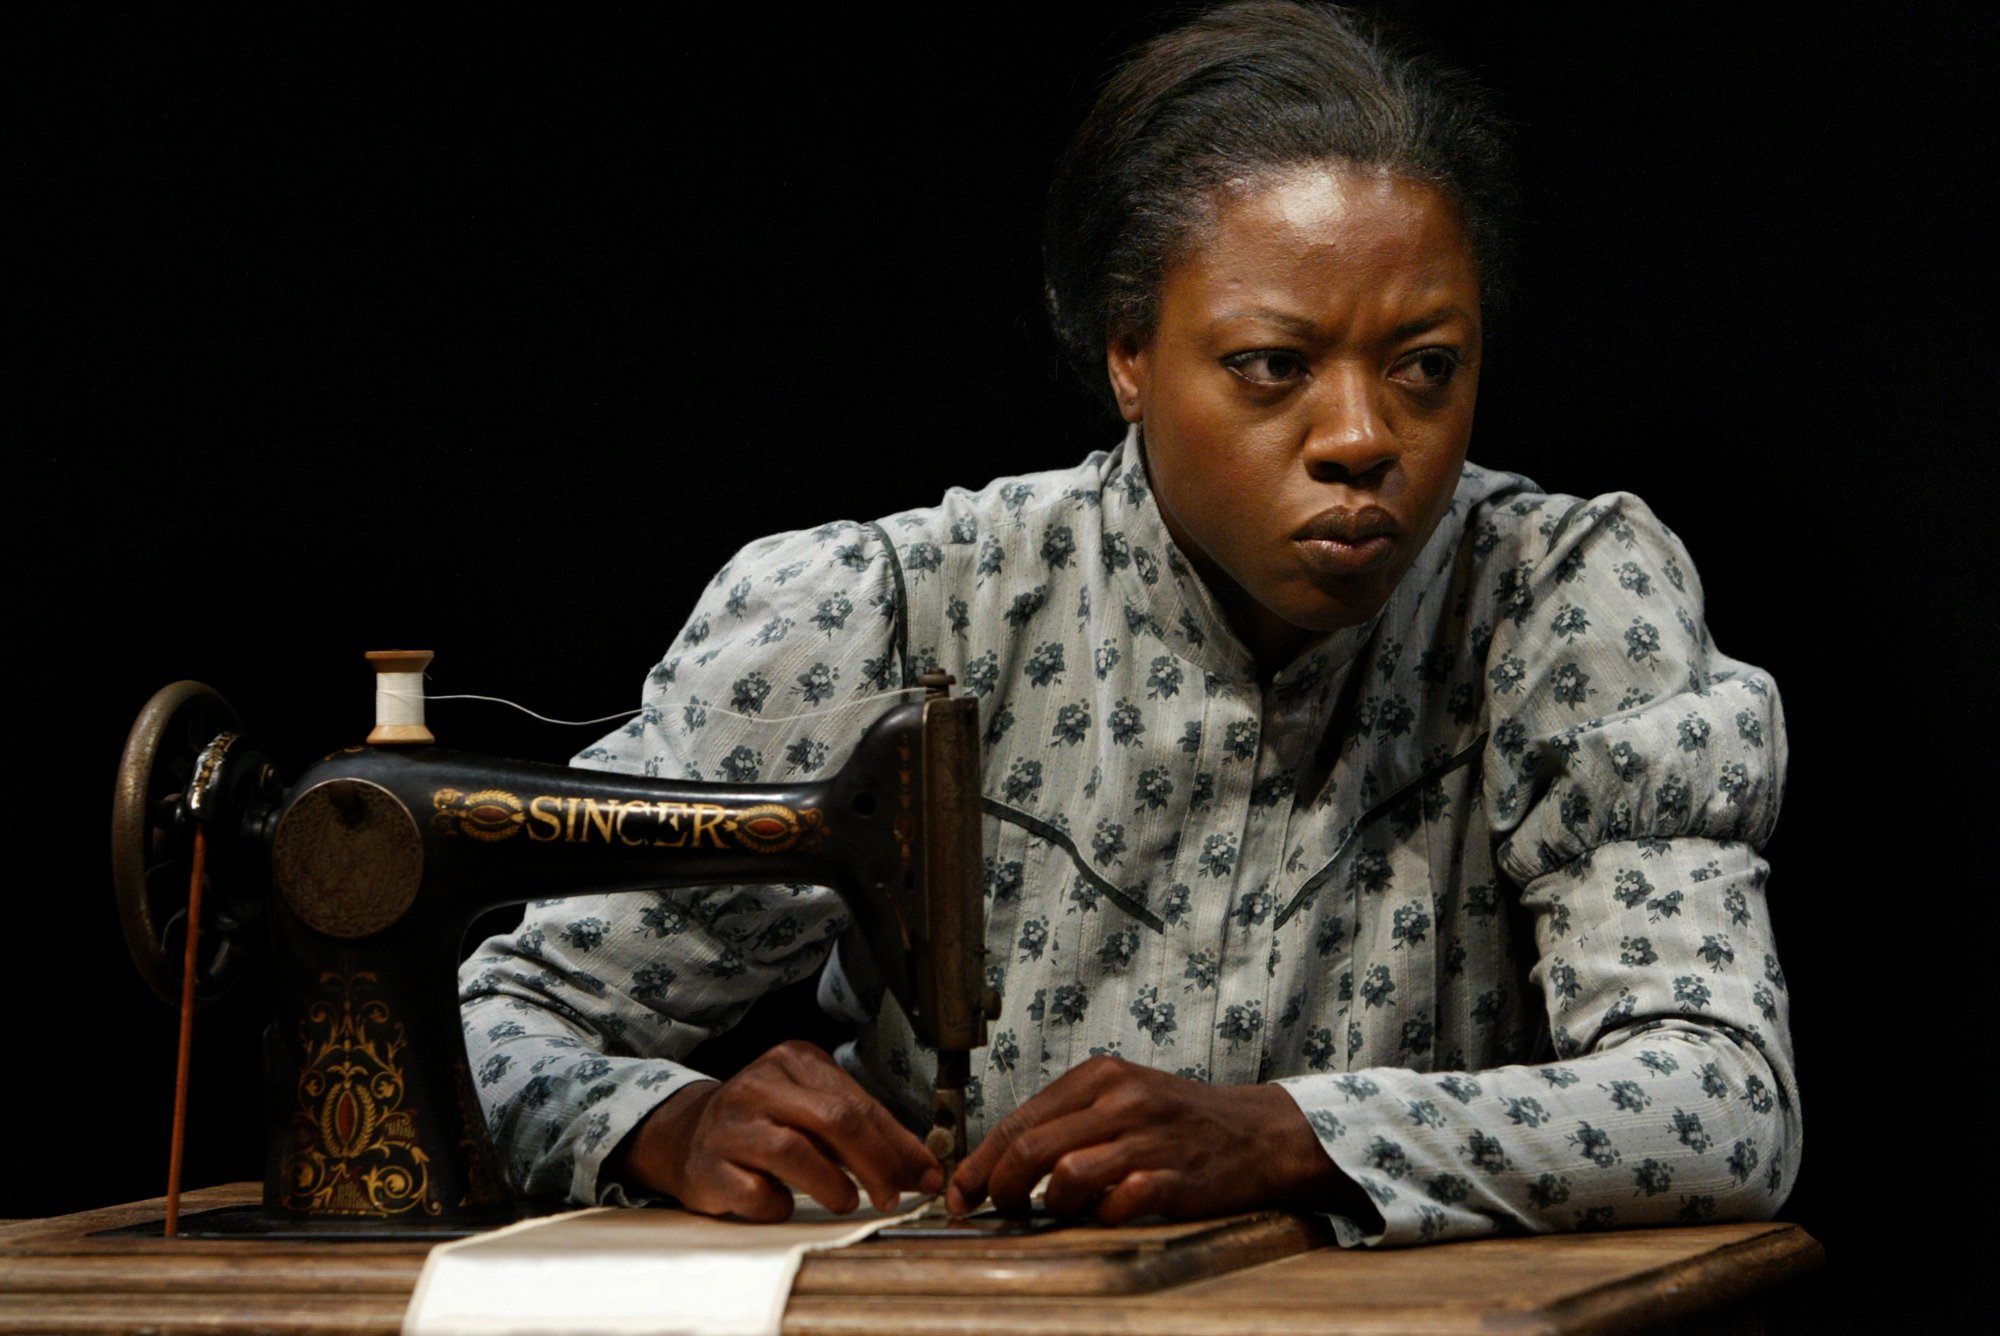 Viola Davis plays Esther in the play "Intimate Apparel" on May 25, 2001. | Source: Anne Cusack/Los Angeles Times/Getty Images